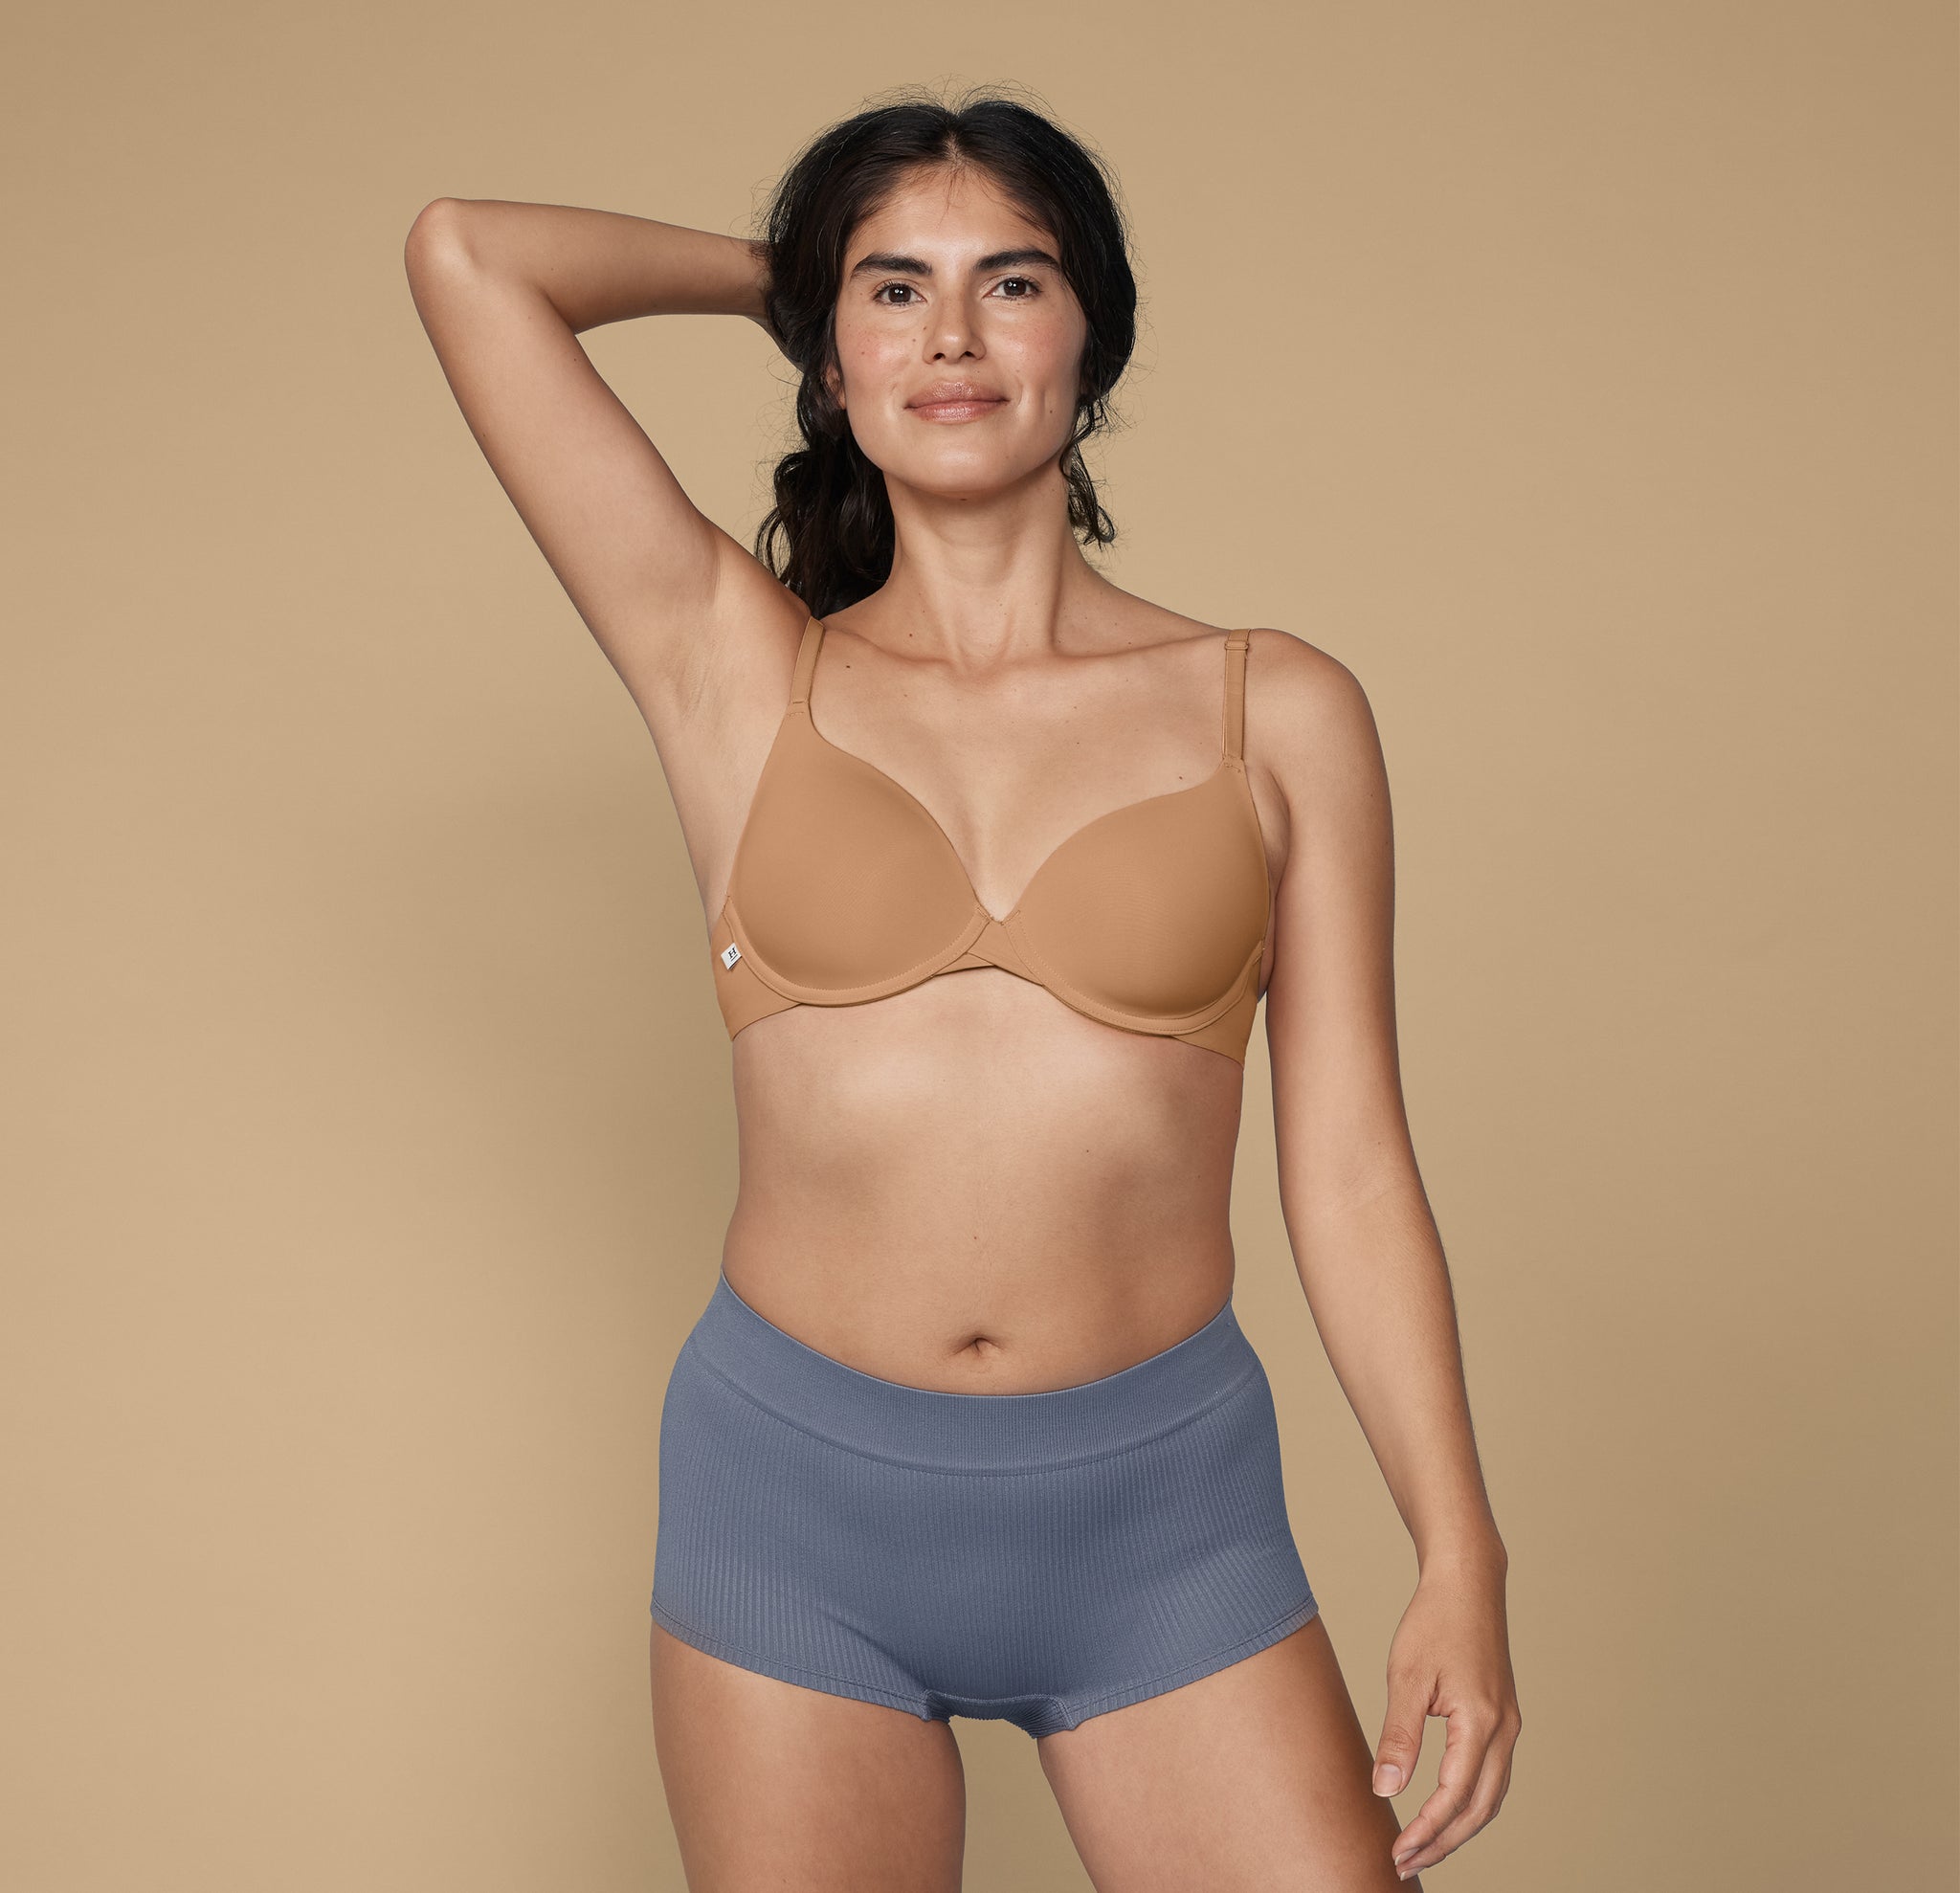 The Base was named the best supportive, shapely bra by Wirecutter -  Harper Wilde